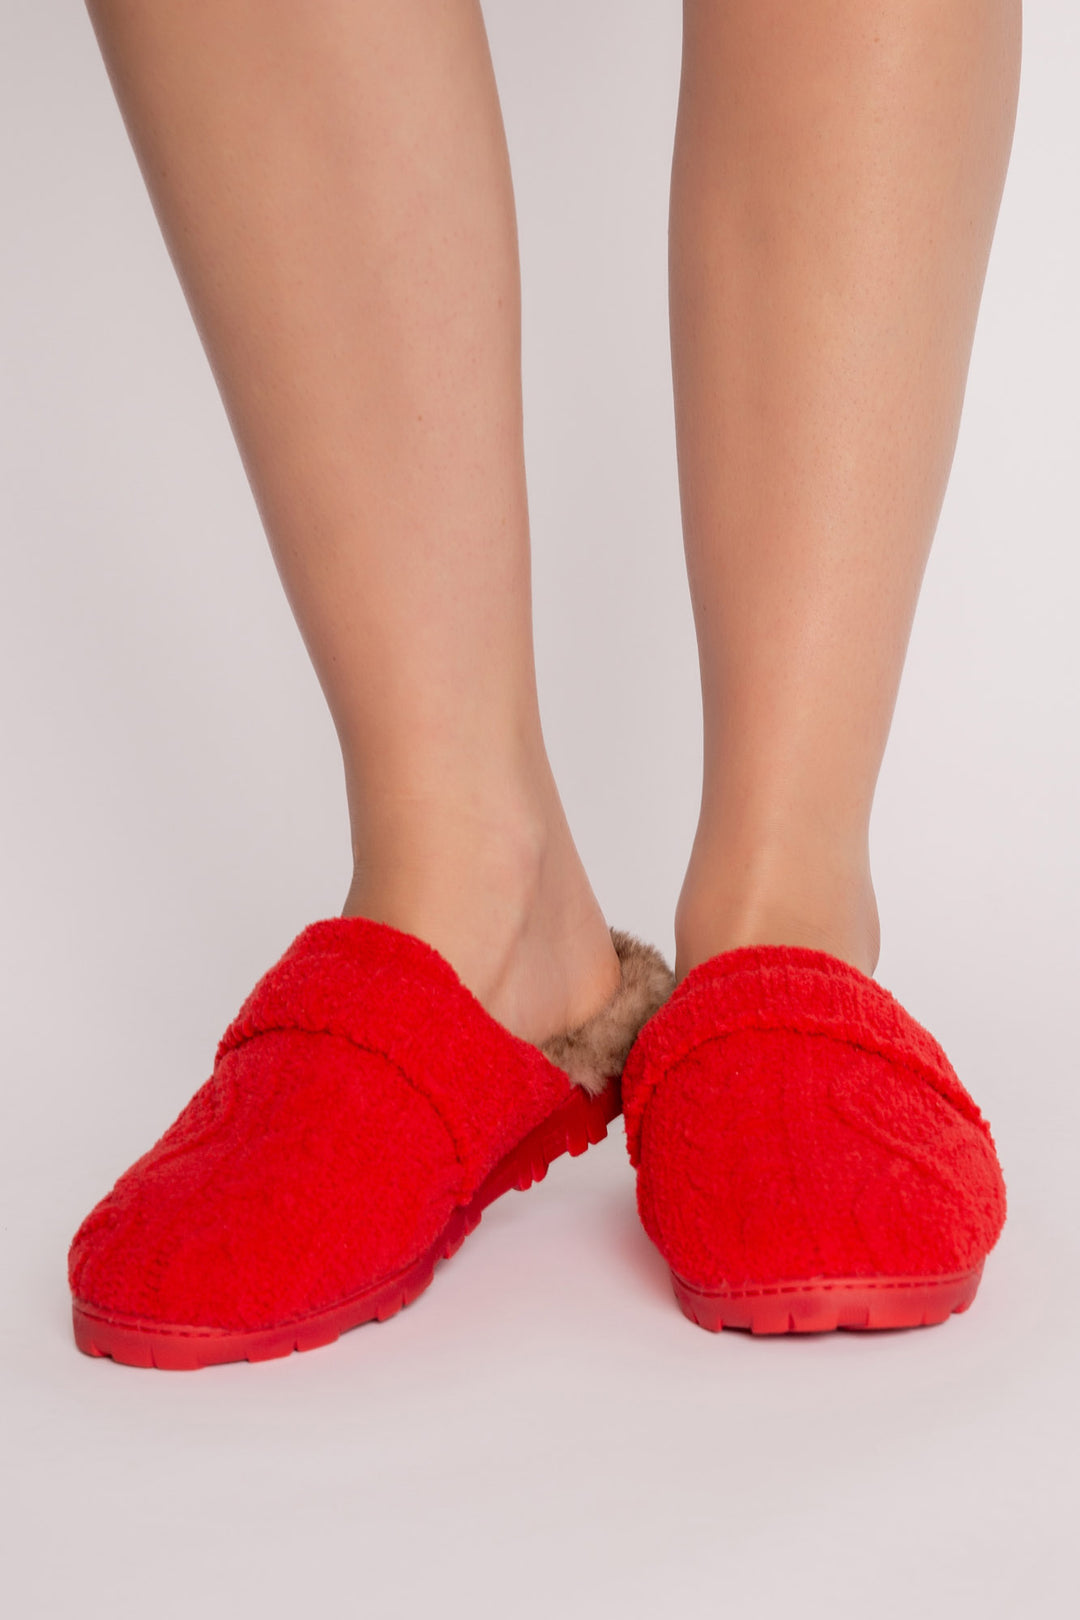 Slippers in red chenille knit cable pattern with rib trim. Molded sole & soft food-bed. (7257678348388)